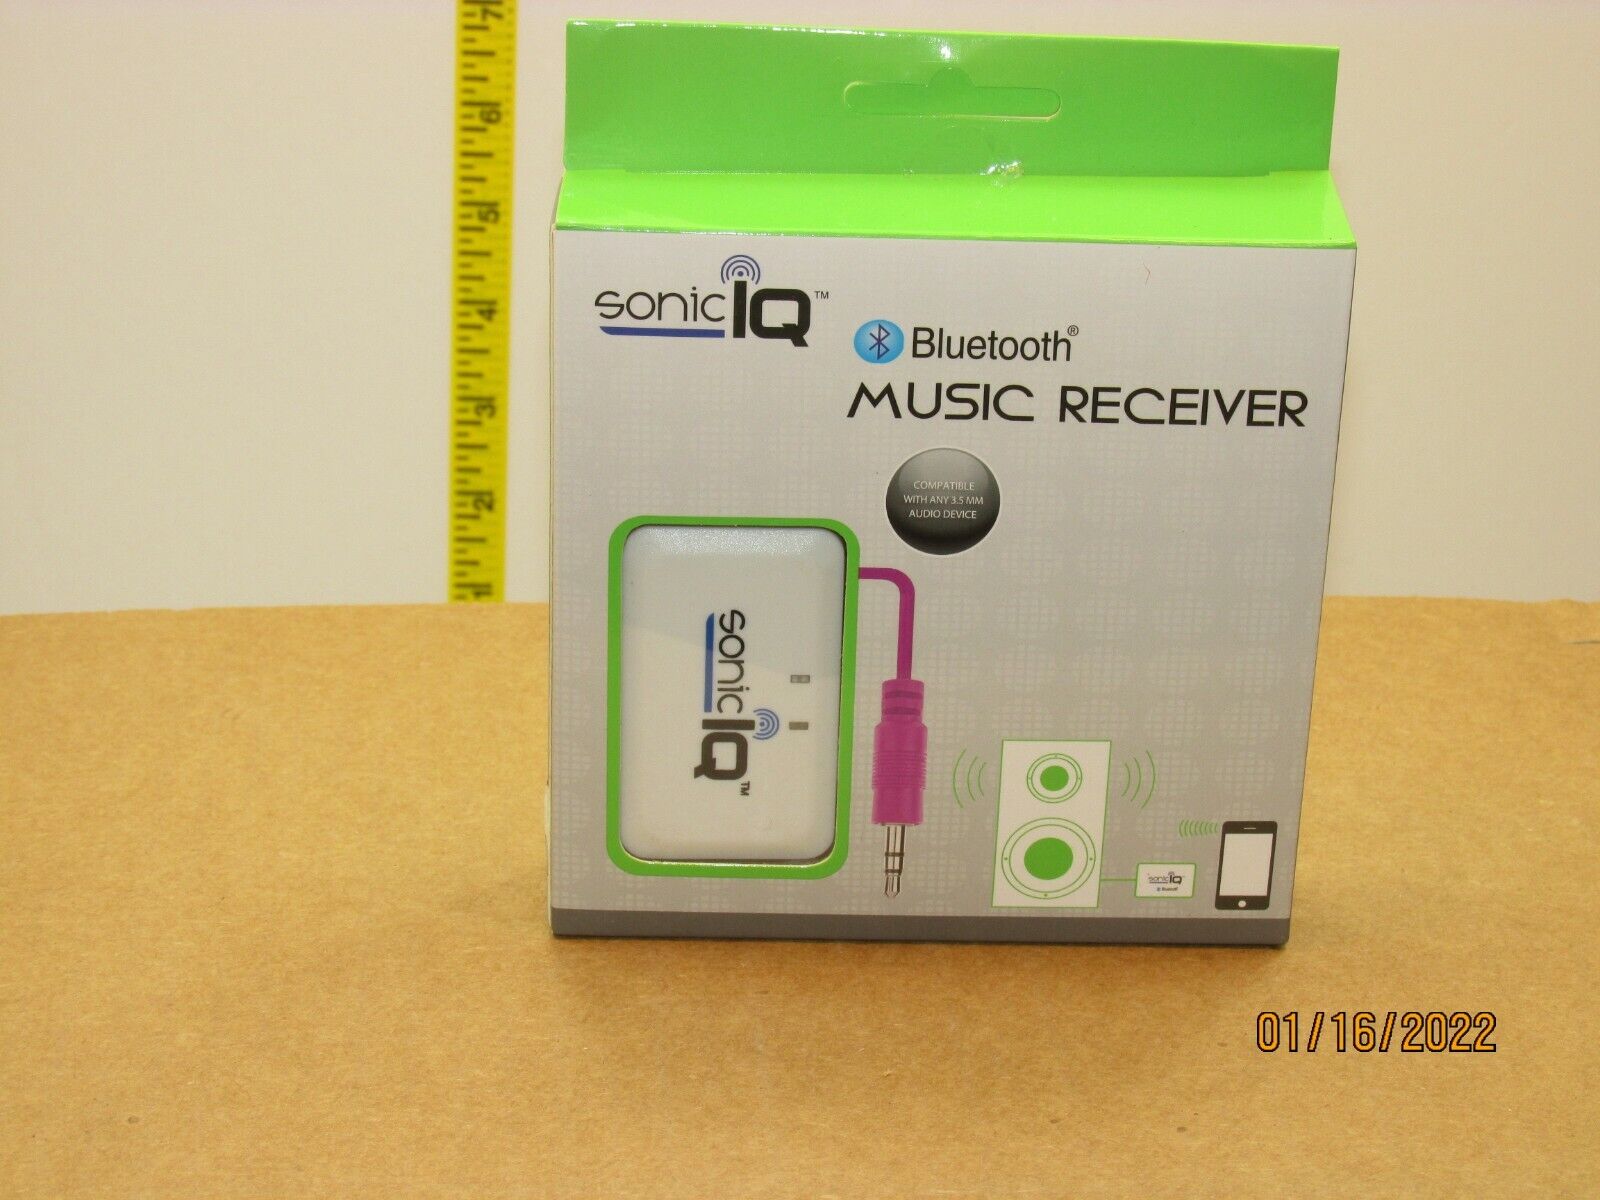 The listing is for:(1) Sonic IQ BTR-24-2609 Bluetooth Audio Receiver-White